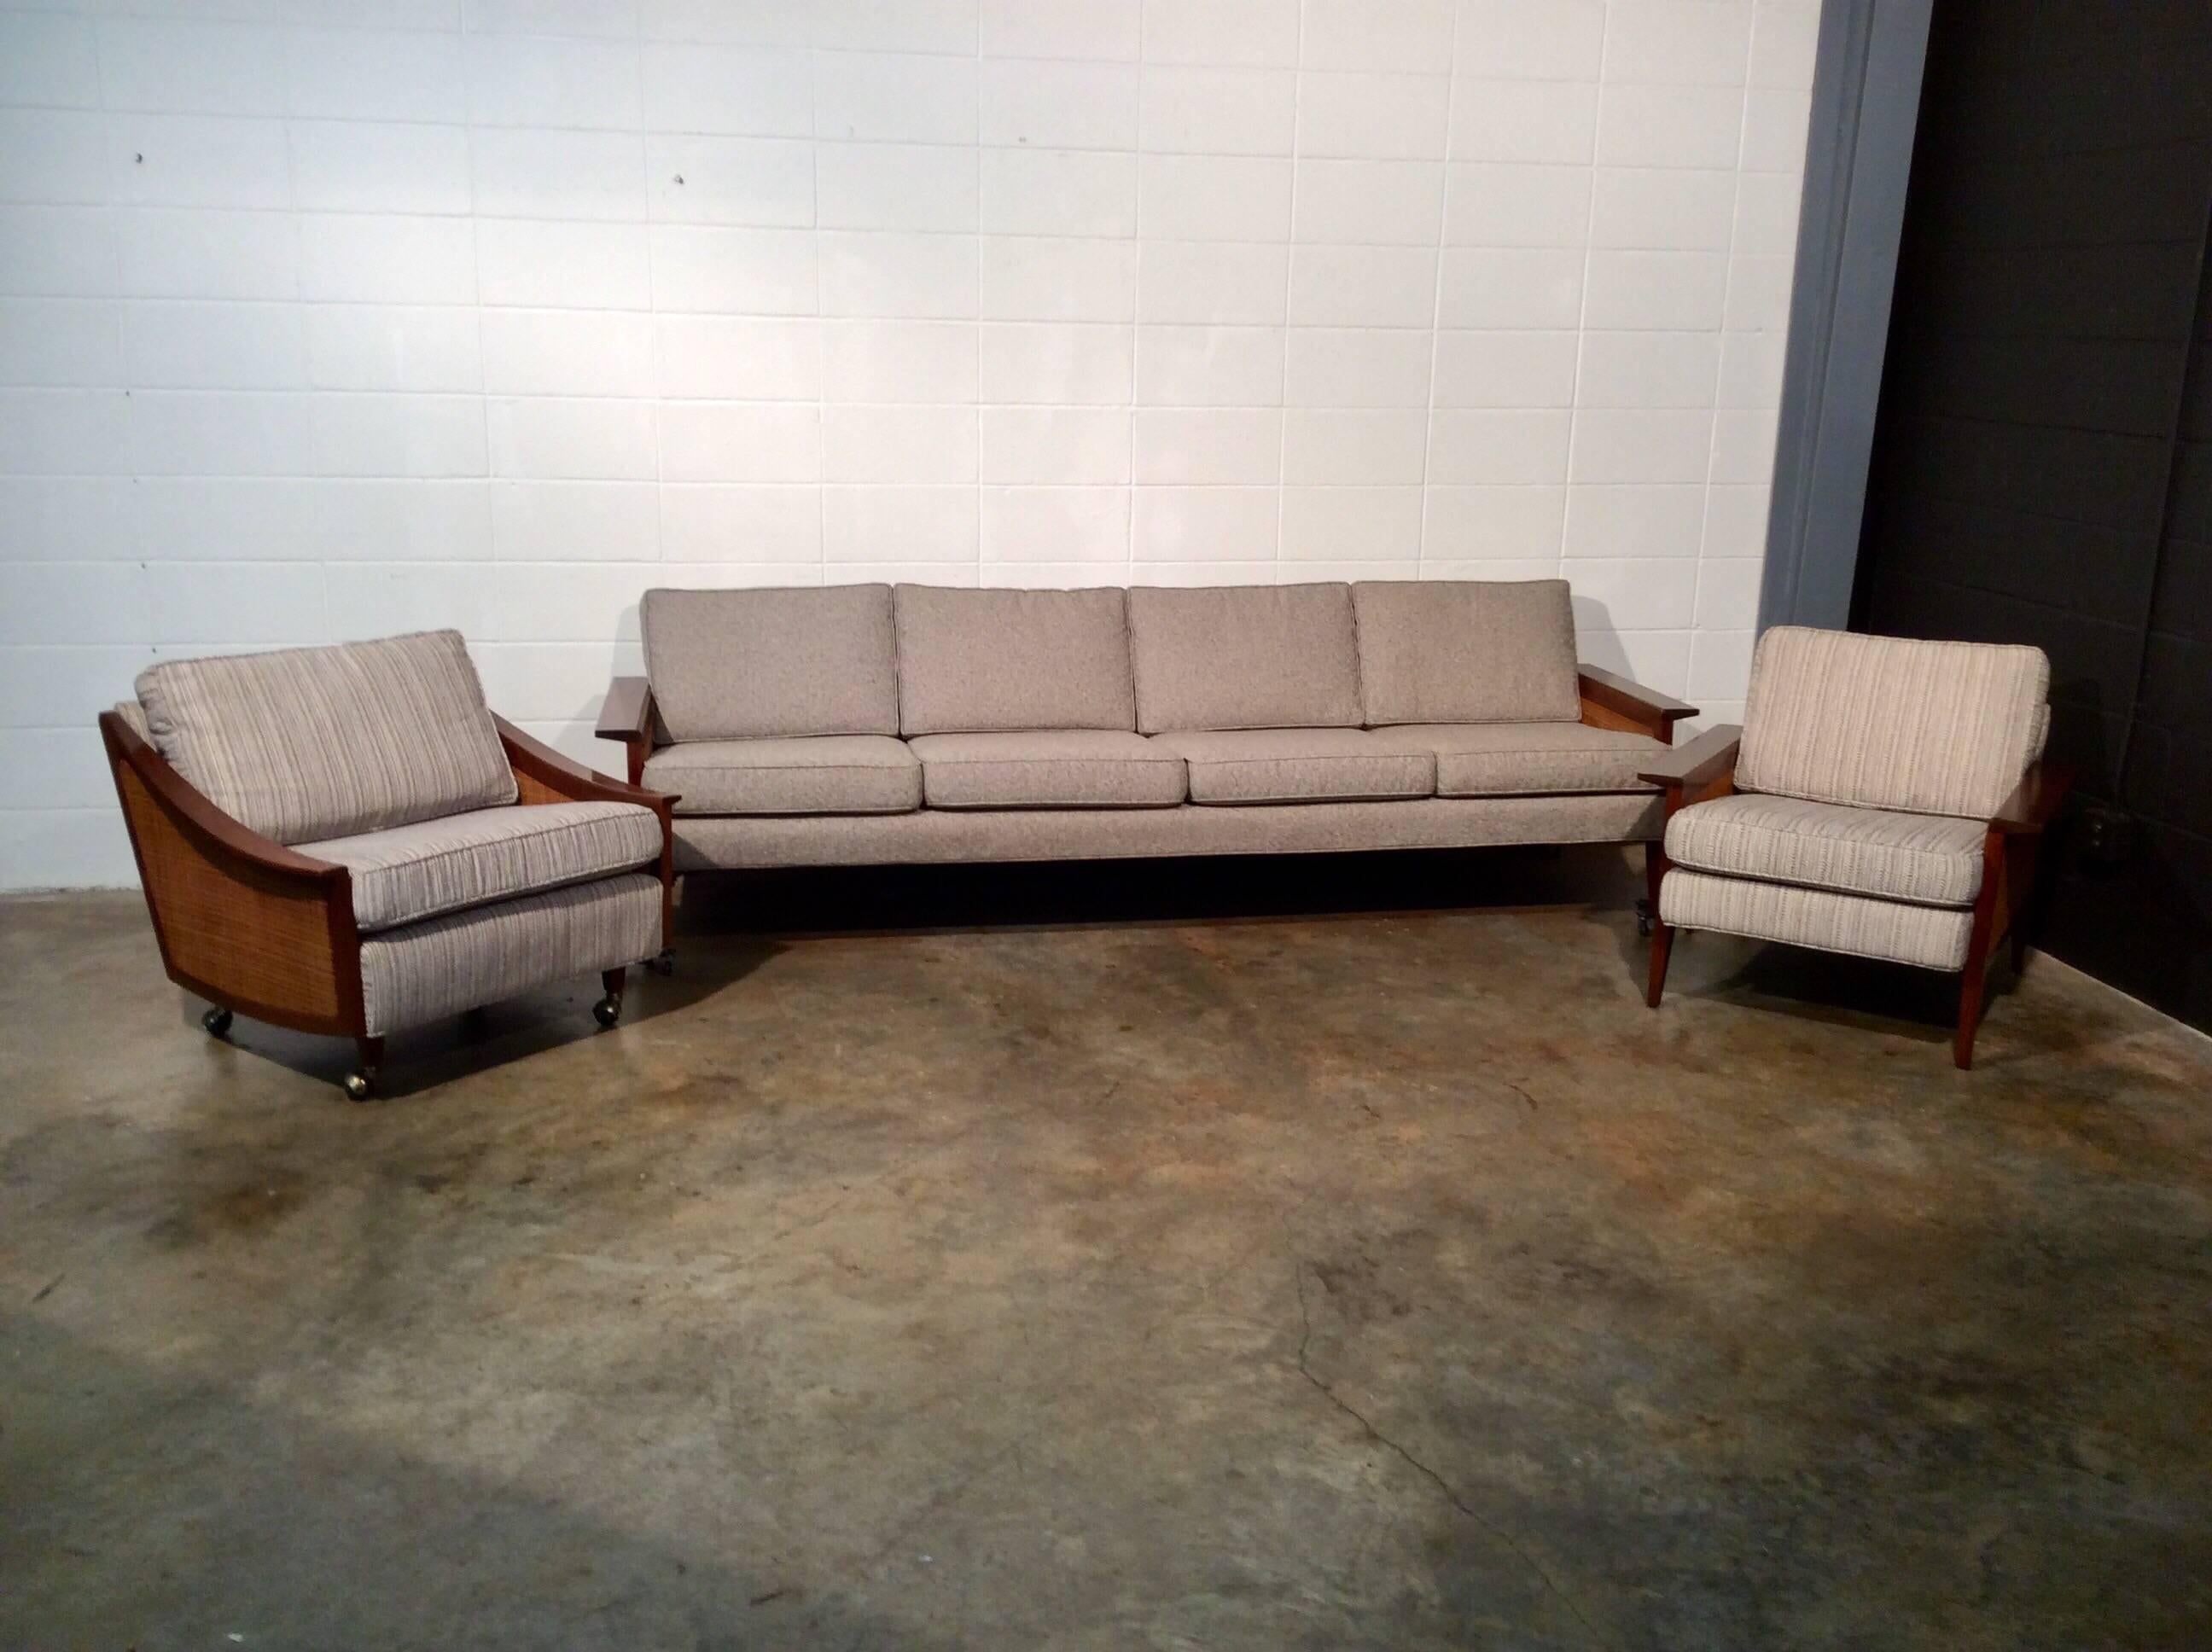 Unique and Restored Mid-Century Modern Sofa by Iconic Galloways of Tampa 3